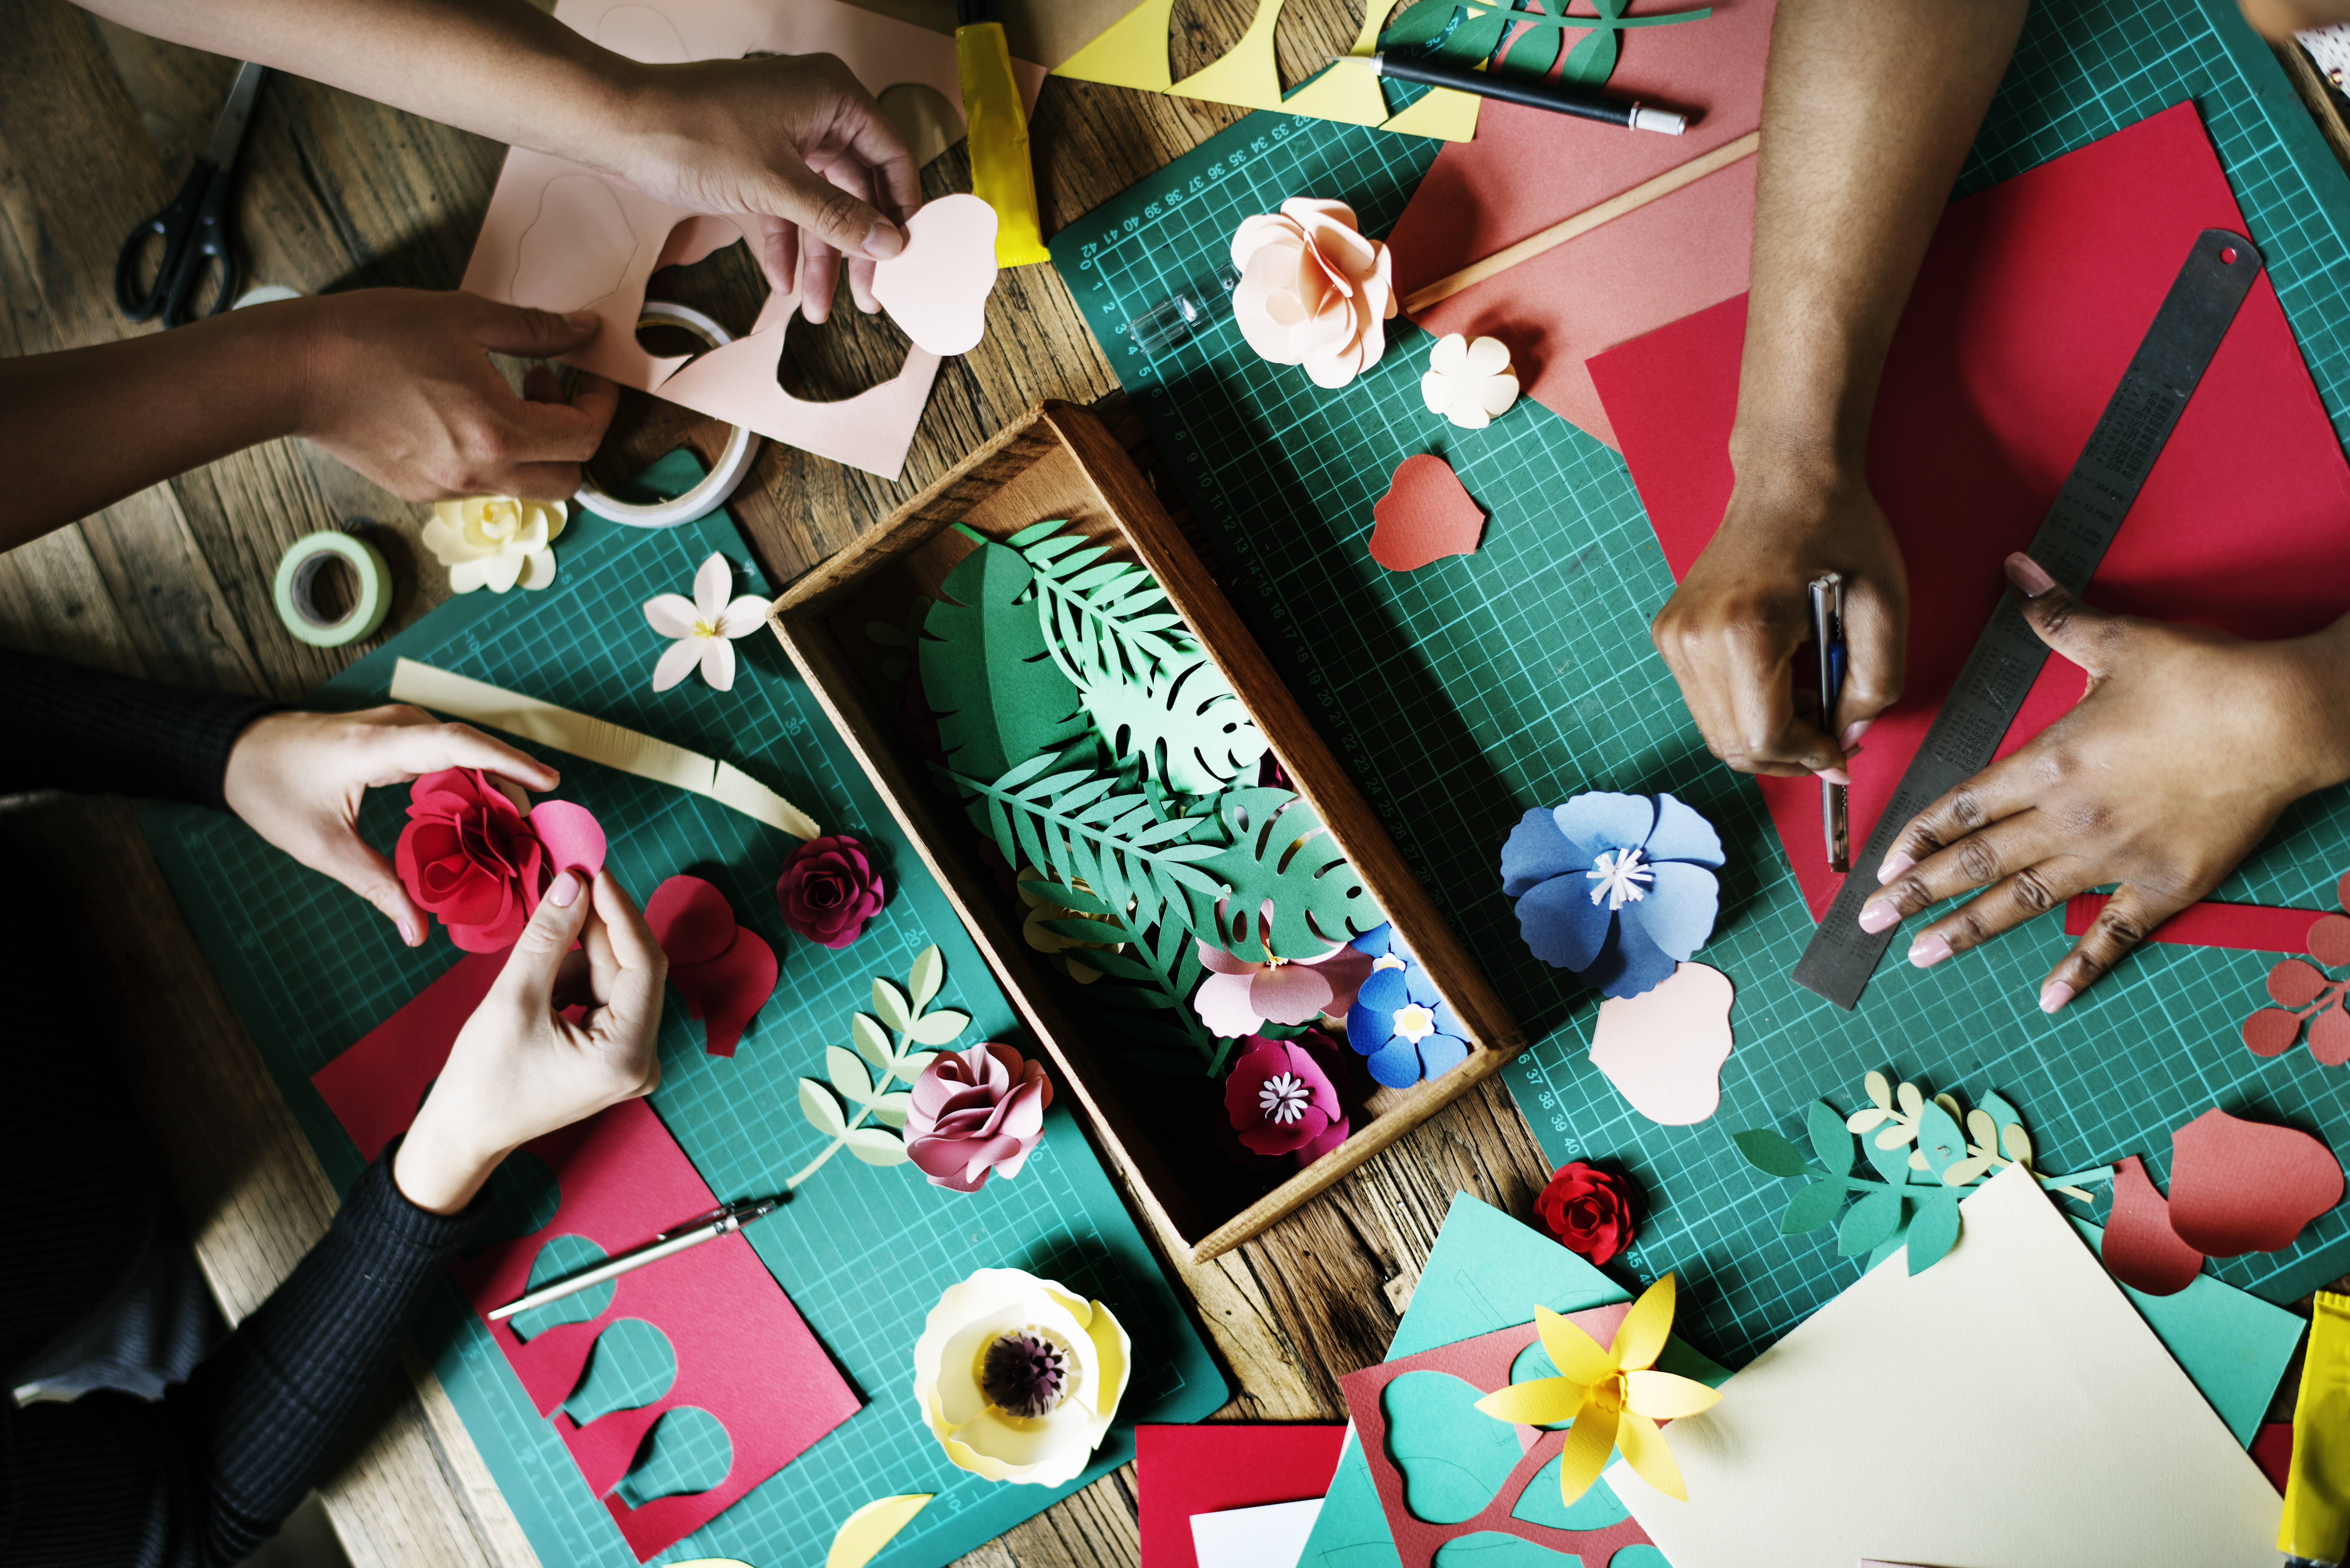 A photo of adult hands creating paper crafts at a table.